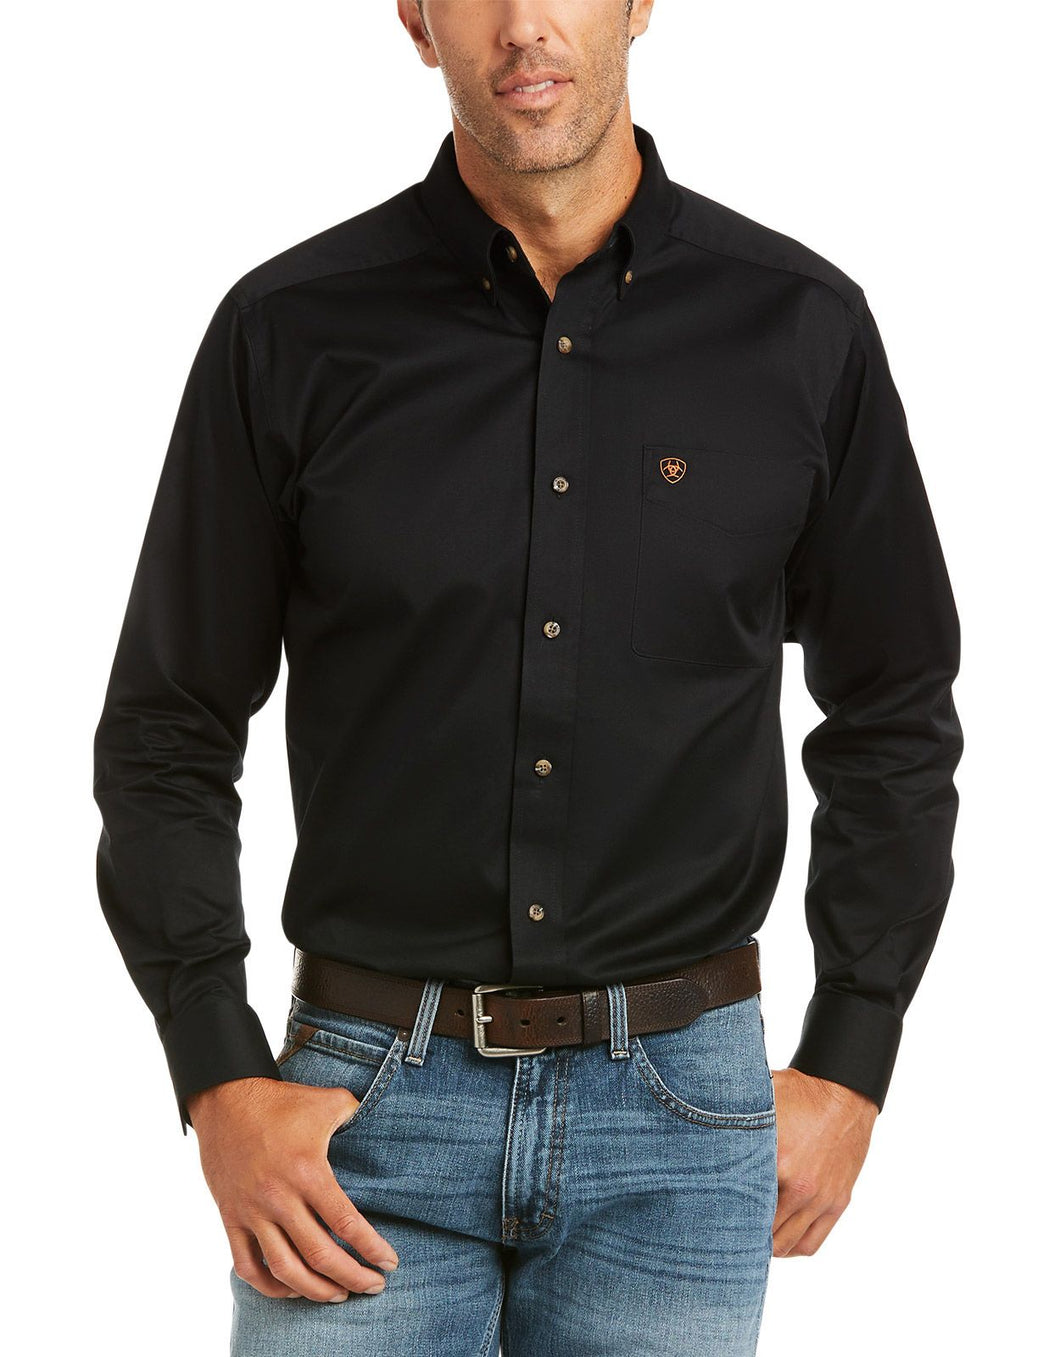 Ariat Black Fitted Men's Shirt